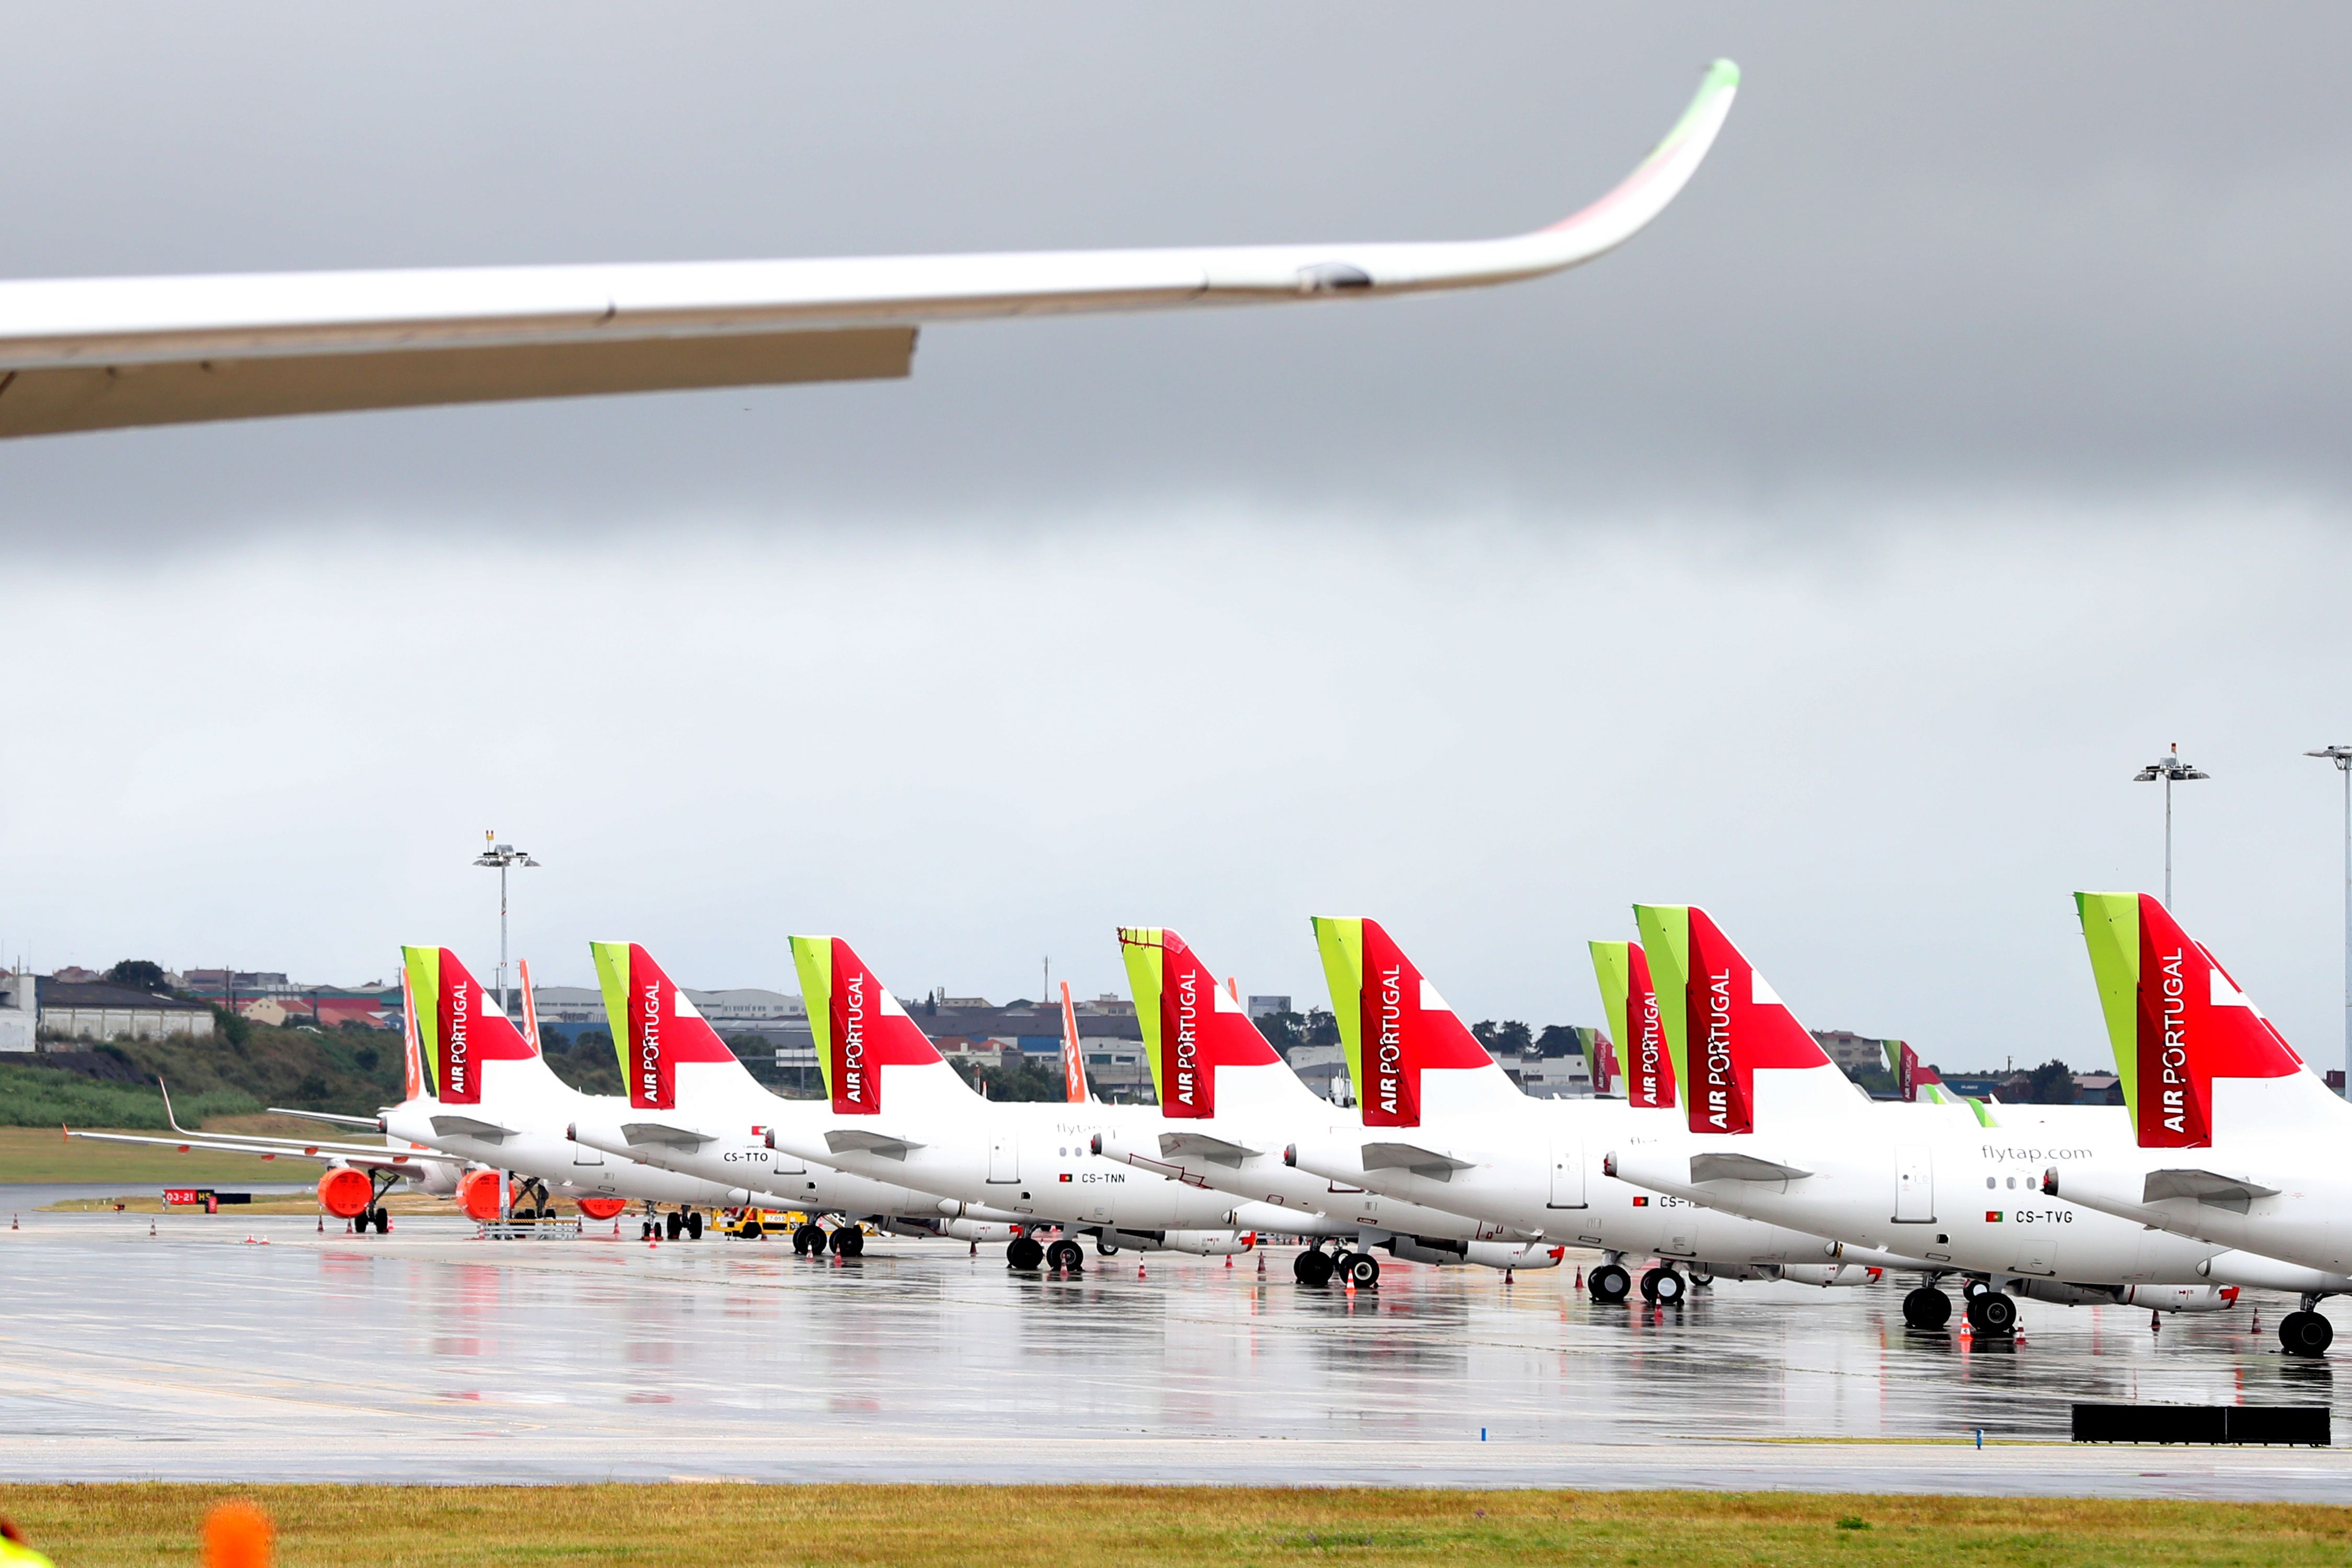 TAP Portugal aircraft tails